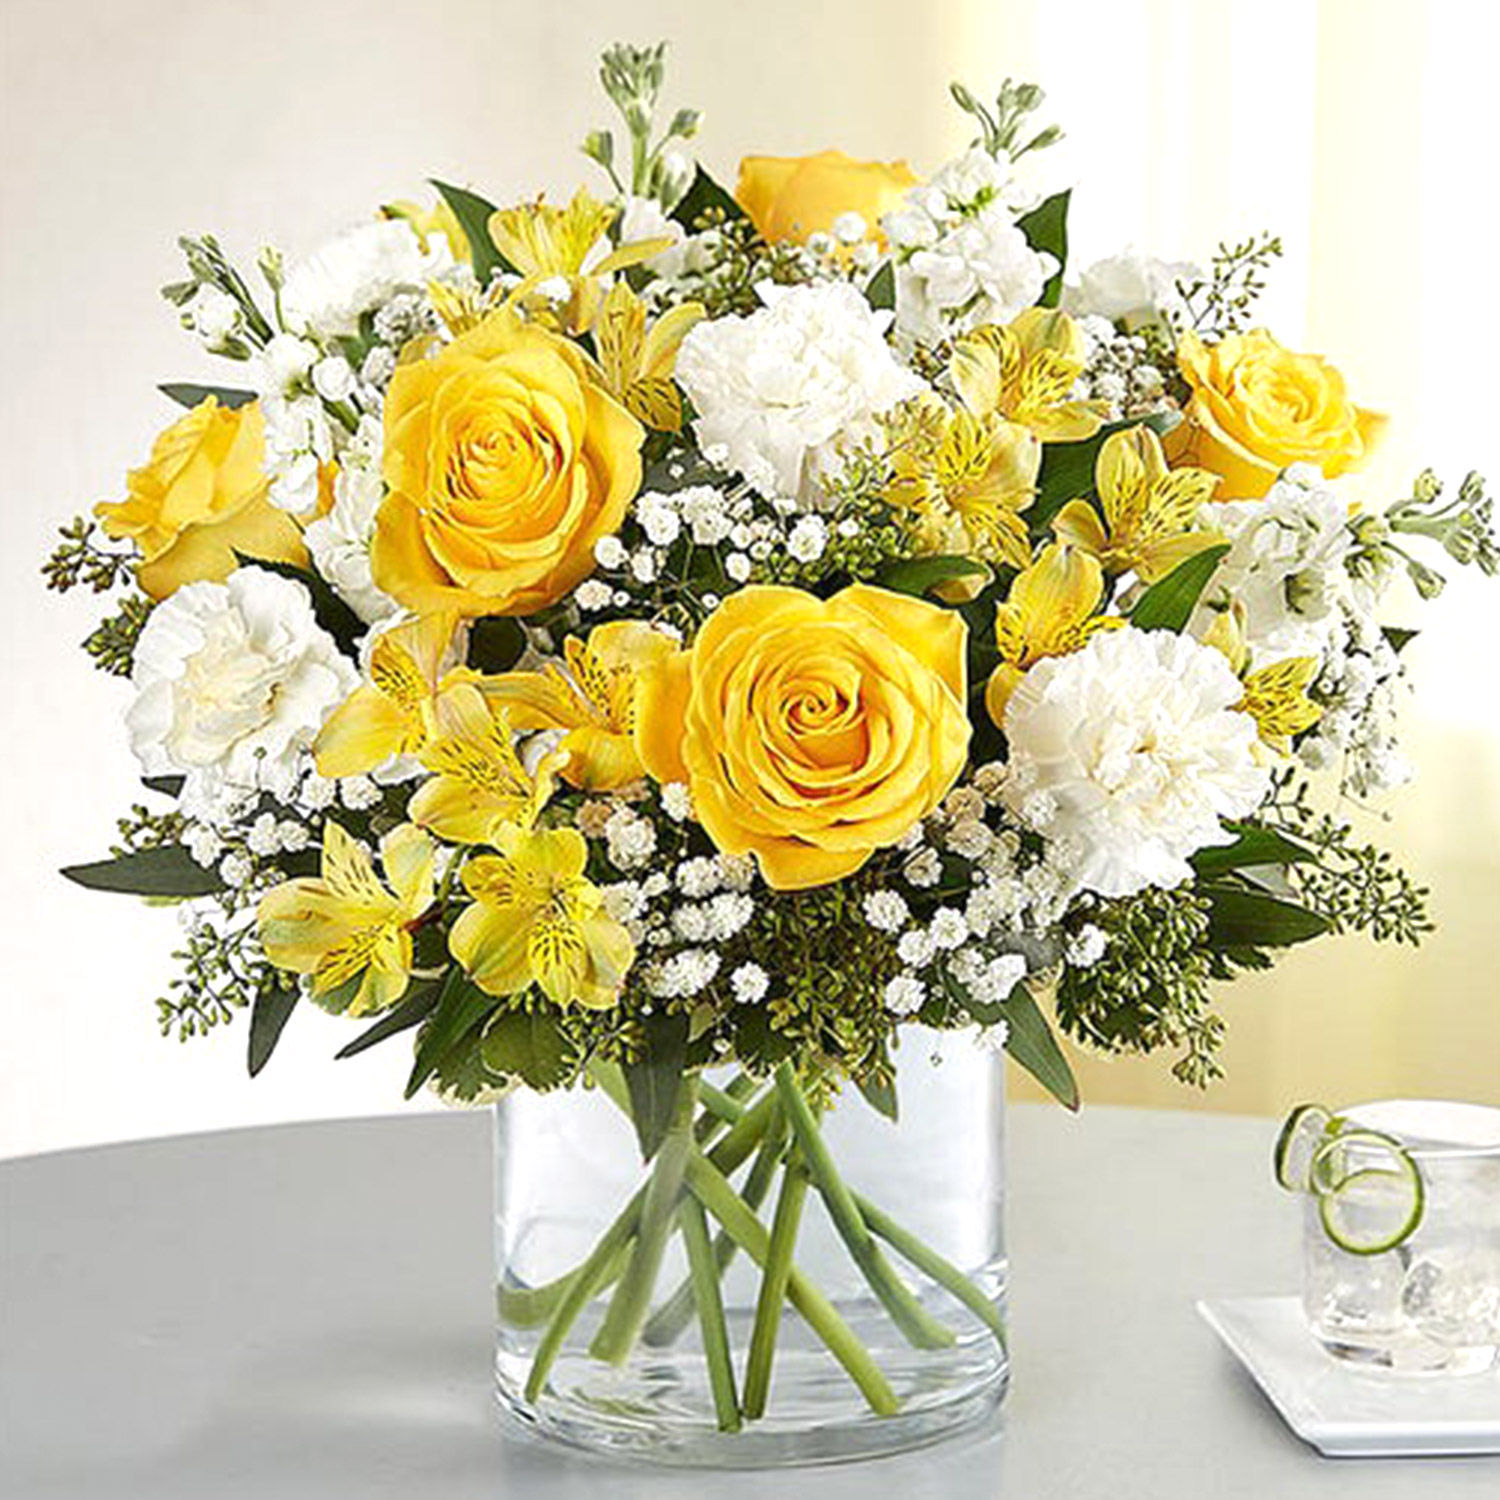 Online Yellow and White Mixed Flower Vase Gift Delivery in UAE - Ferns